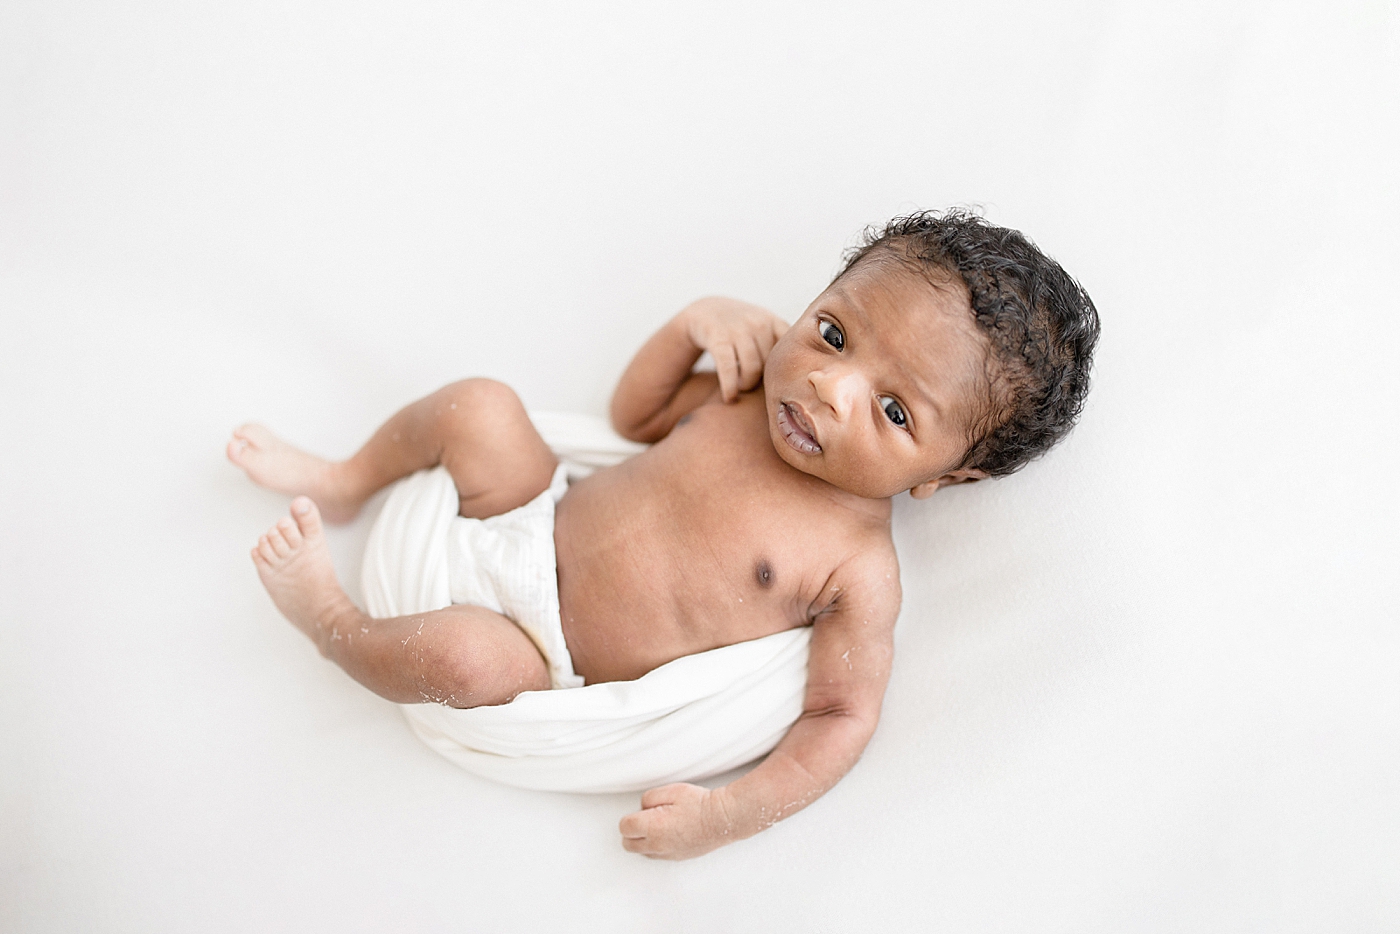 Baby boy wide awake for newborn photos. Photo by Brittany Elise Photography.